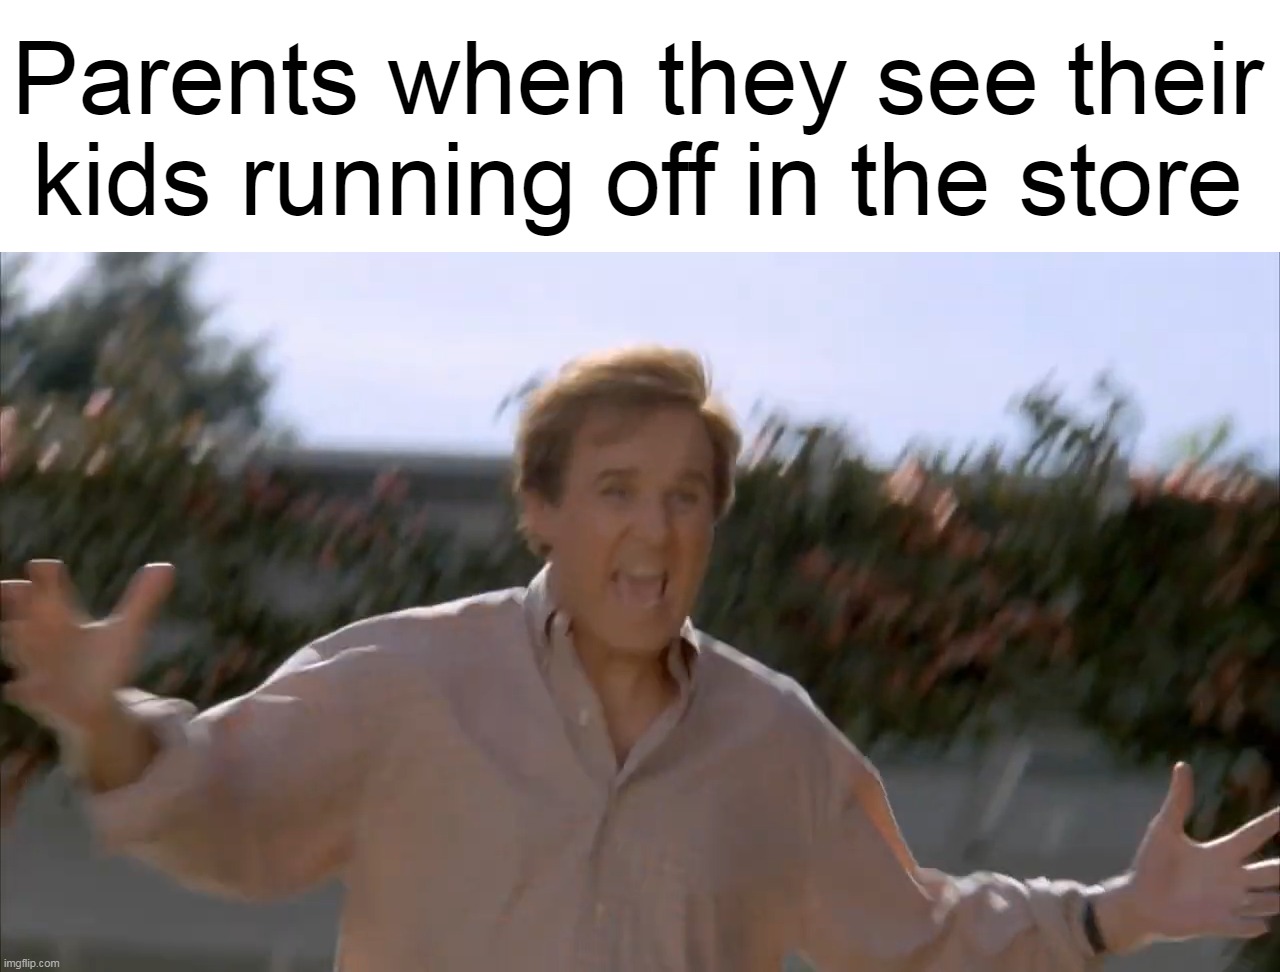 Better Get the Leash Ready | Parents when they see their kids running off in the store | image tagged in meme,memes,humor,parenting,relatable,parents | made w/ Imgflip meme maker